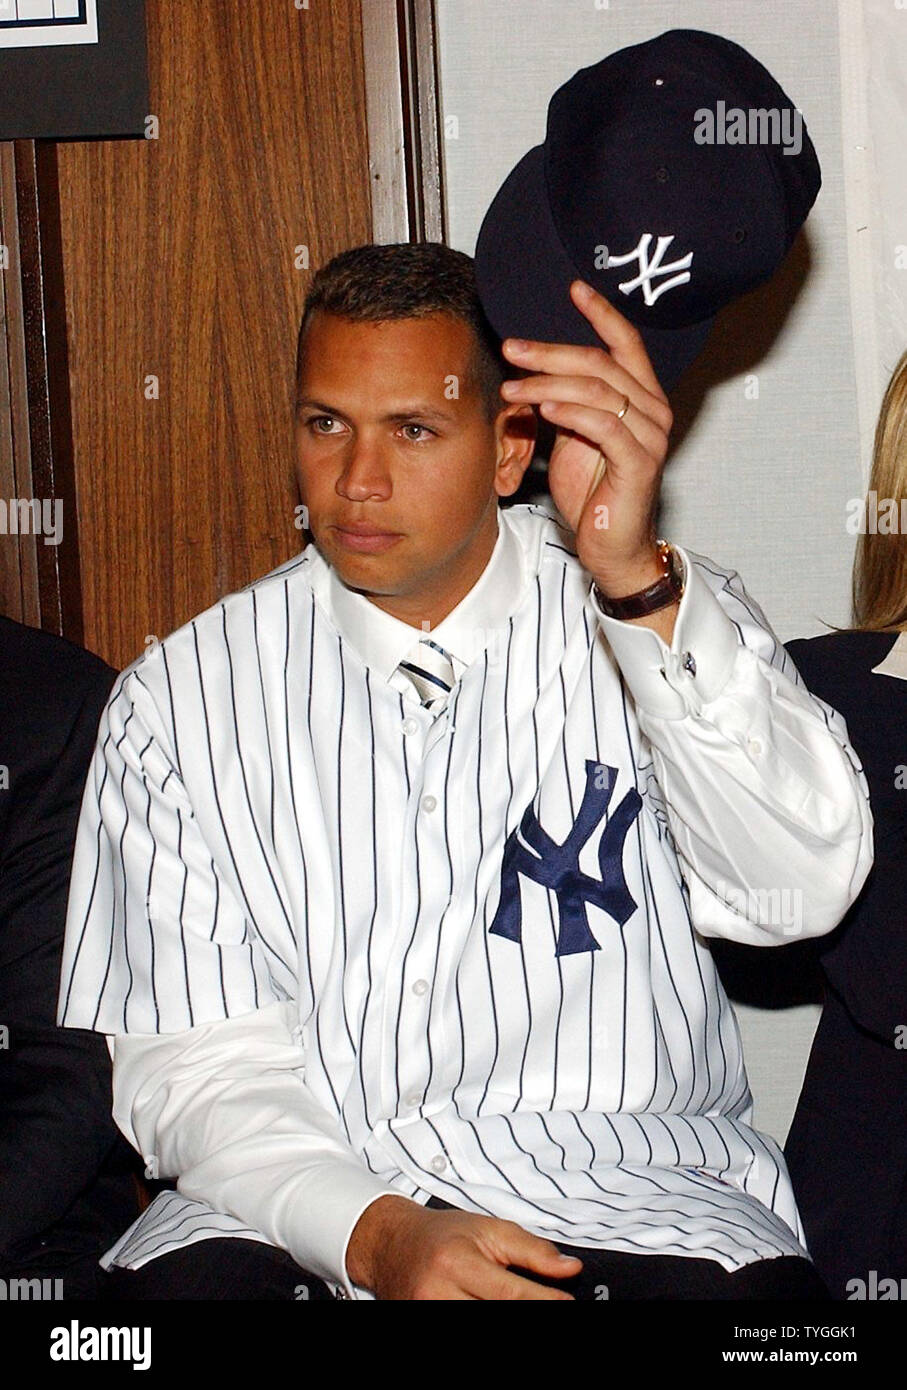 Reigning American League Most Valuable Player Alex Rodriguez tips his hat  to the media covering his Feb. 17, 2004 press conference at New York's  Yankee Stadium after he was introduced as the